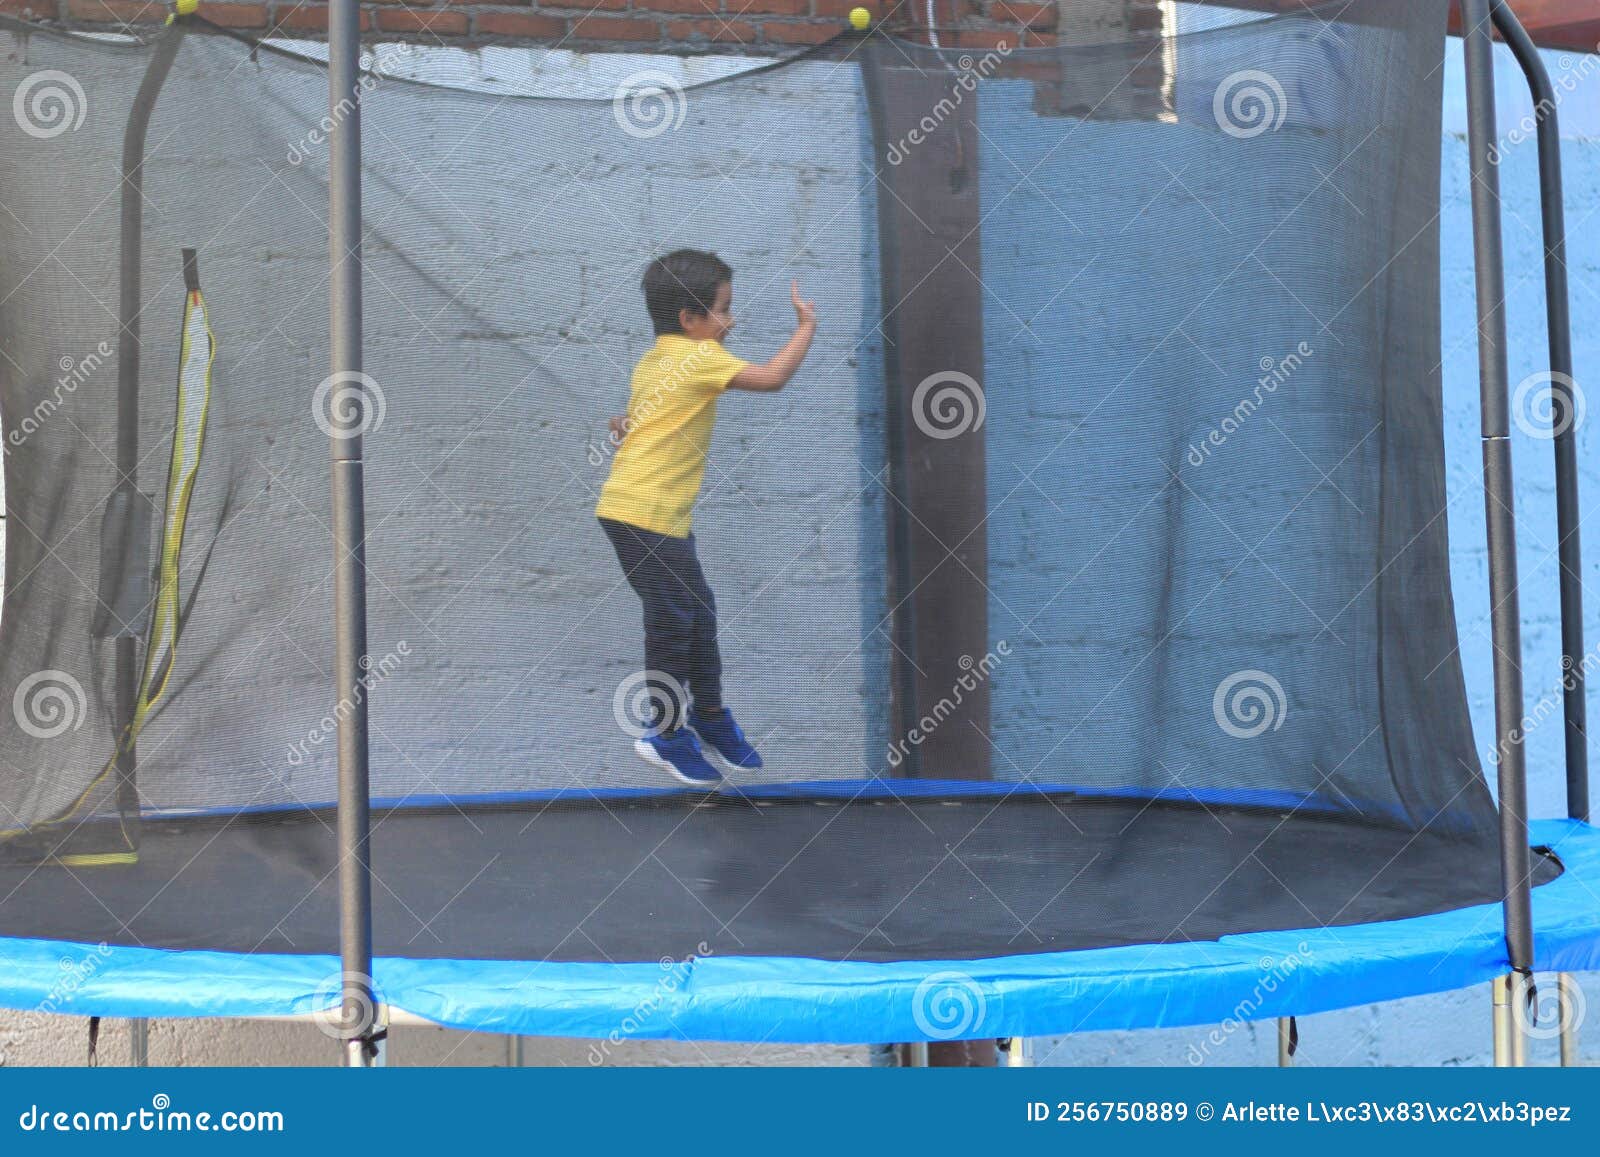 hispanic 6-year-old boy jumping on a brincolin as a physical activity for a healthy life he exercises and has fun alone at home